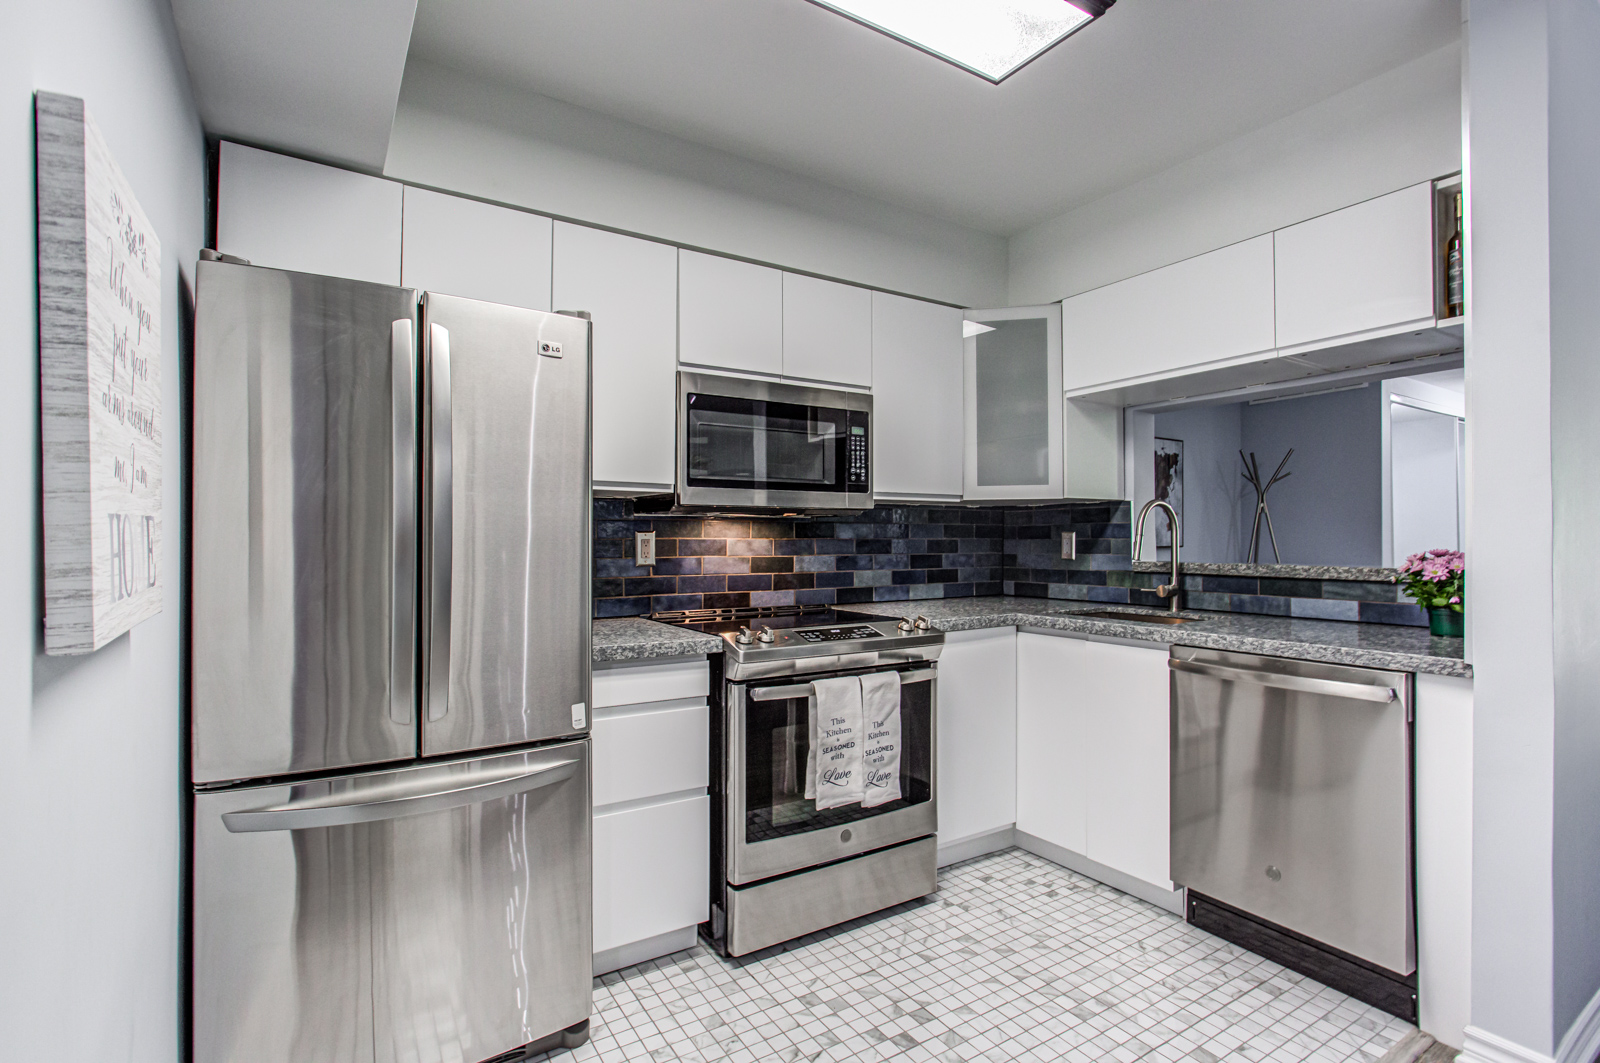 5 Everson Dr kitchen with gray cabinets, dark blue brick back-splash, and marble floor tiles.